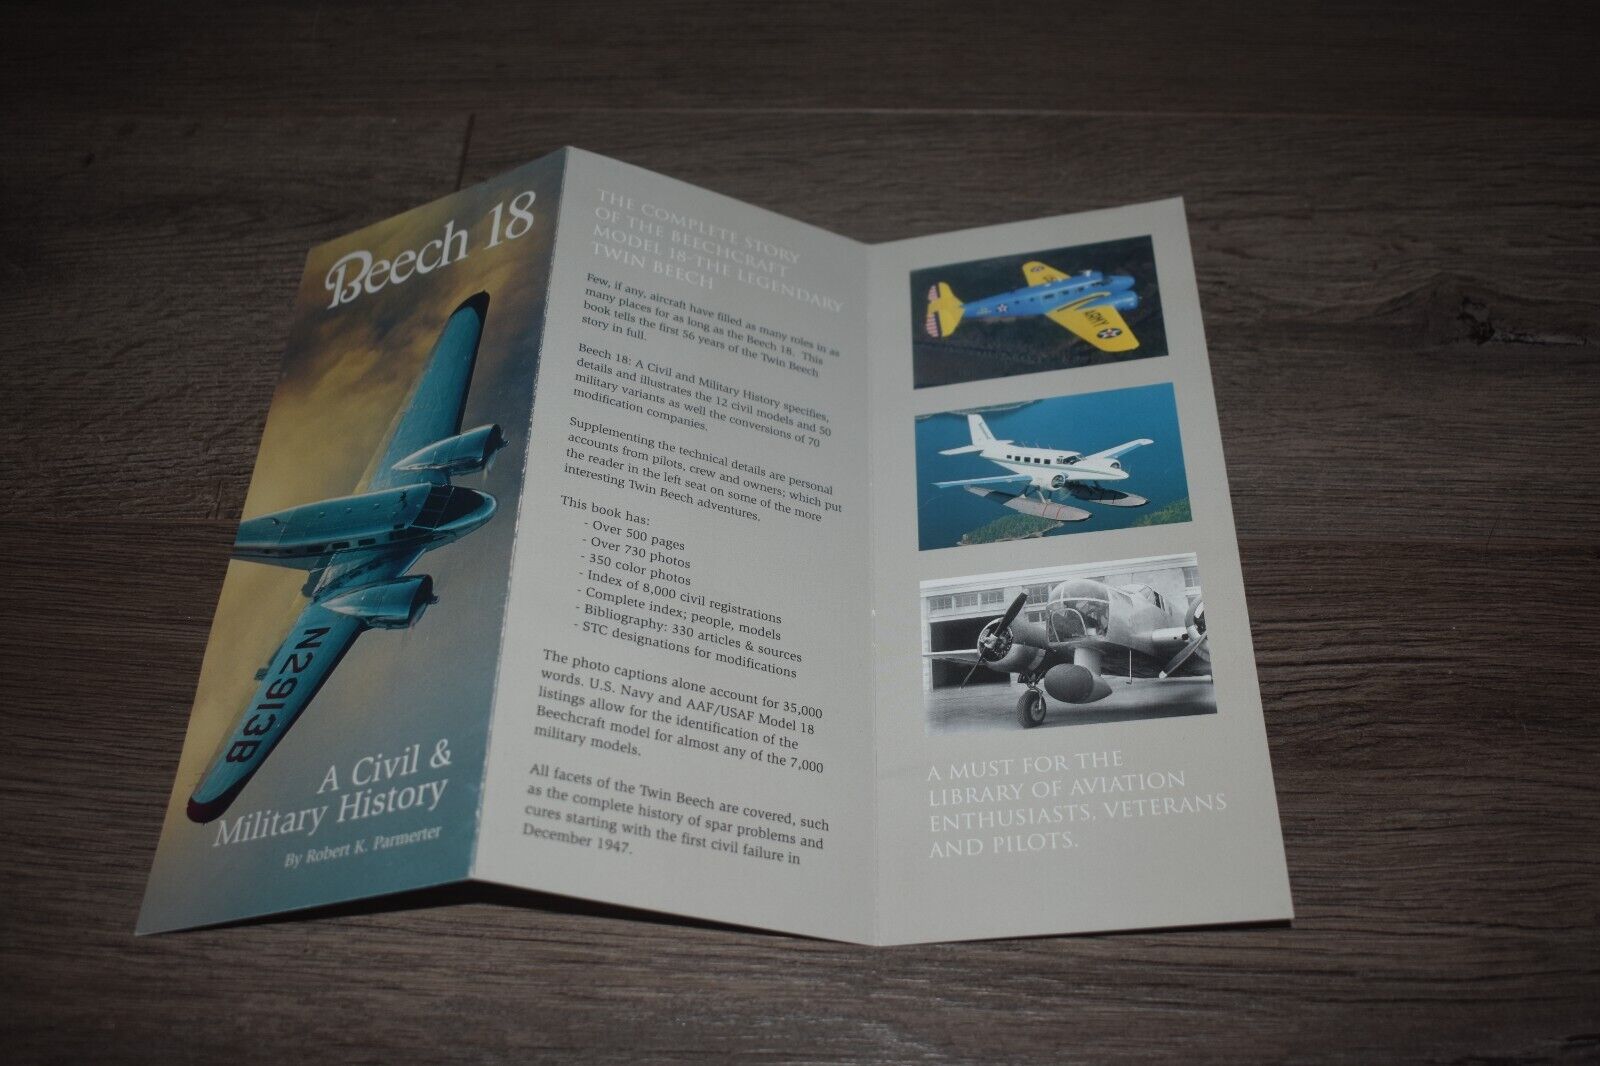 Beech 18: A Civil & Military History by Robert Parmerter book order pamphlet